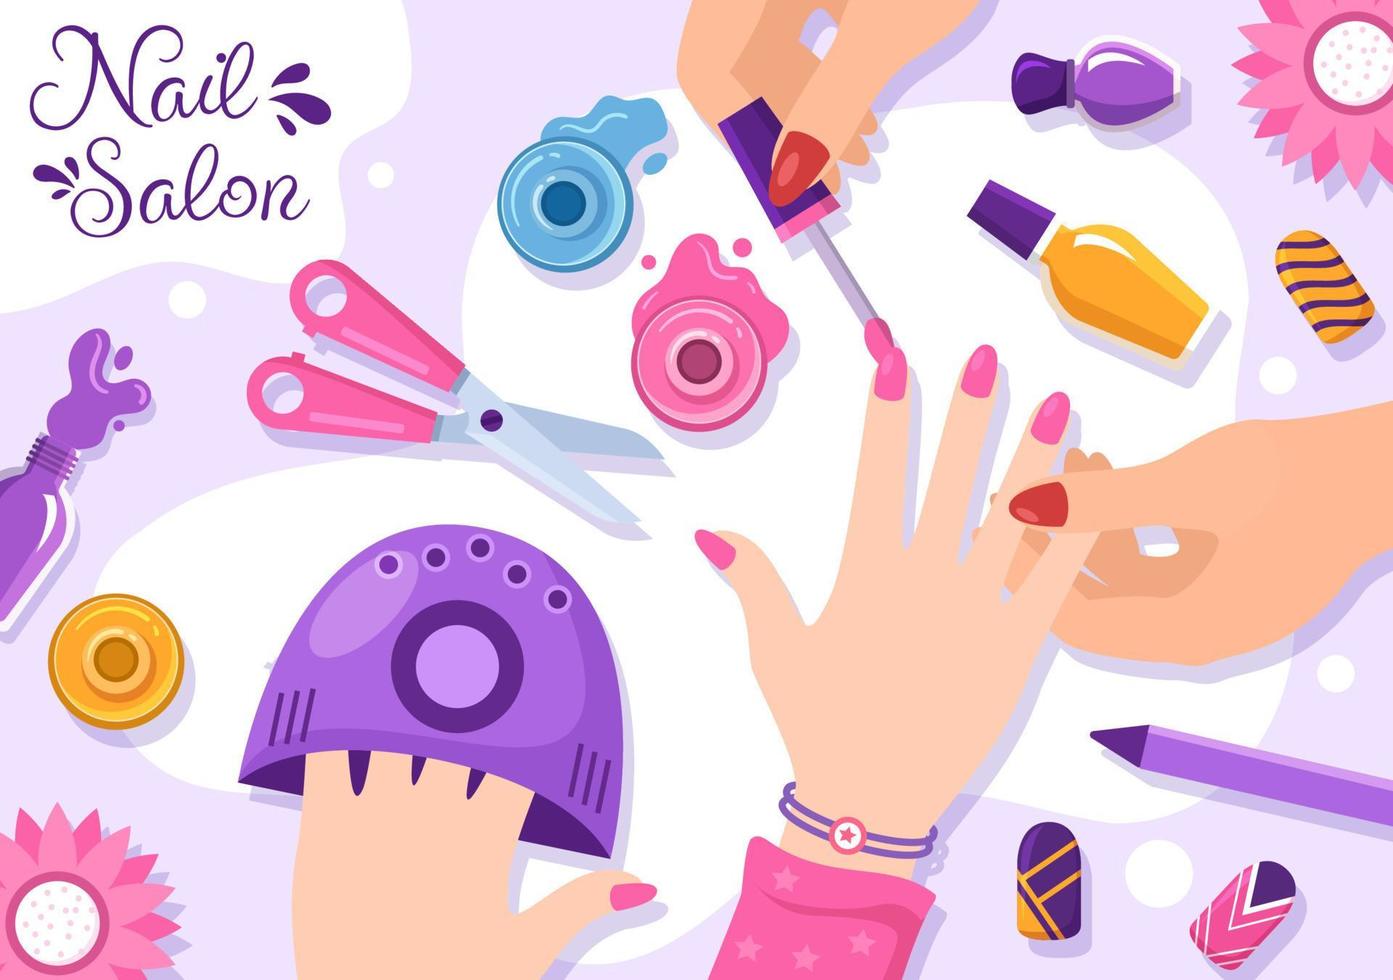 Nail Polish Salon Template Hand Drawn Cartoon Flat Illustration Receiving of Manicure or Pedicure with Tools and Accessories to a Young Girl Concept vector